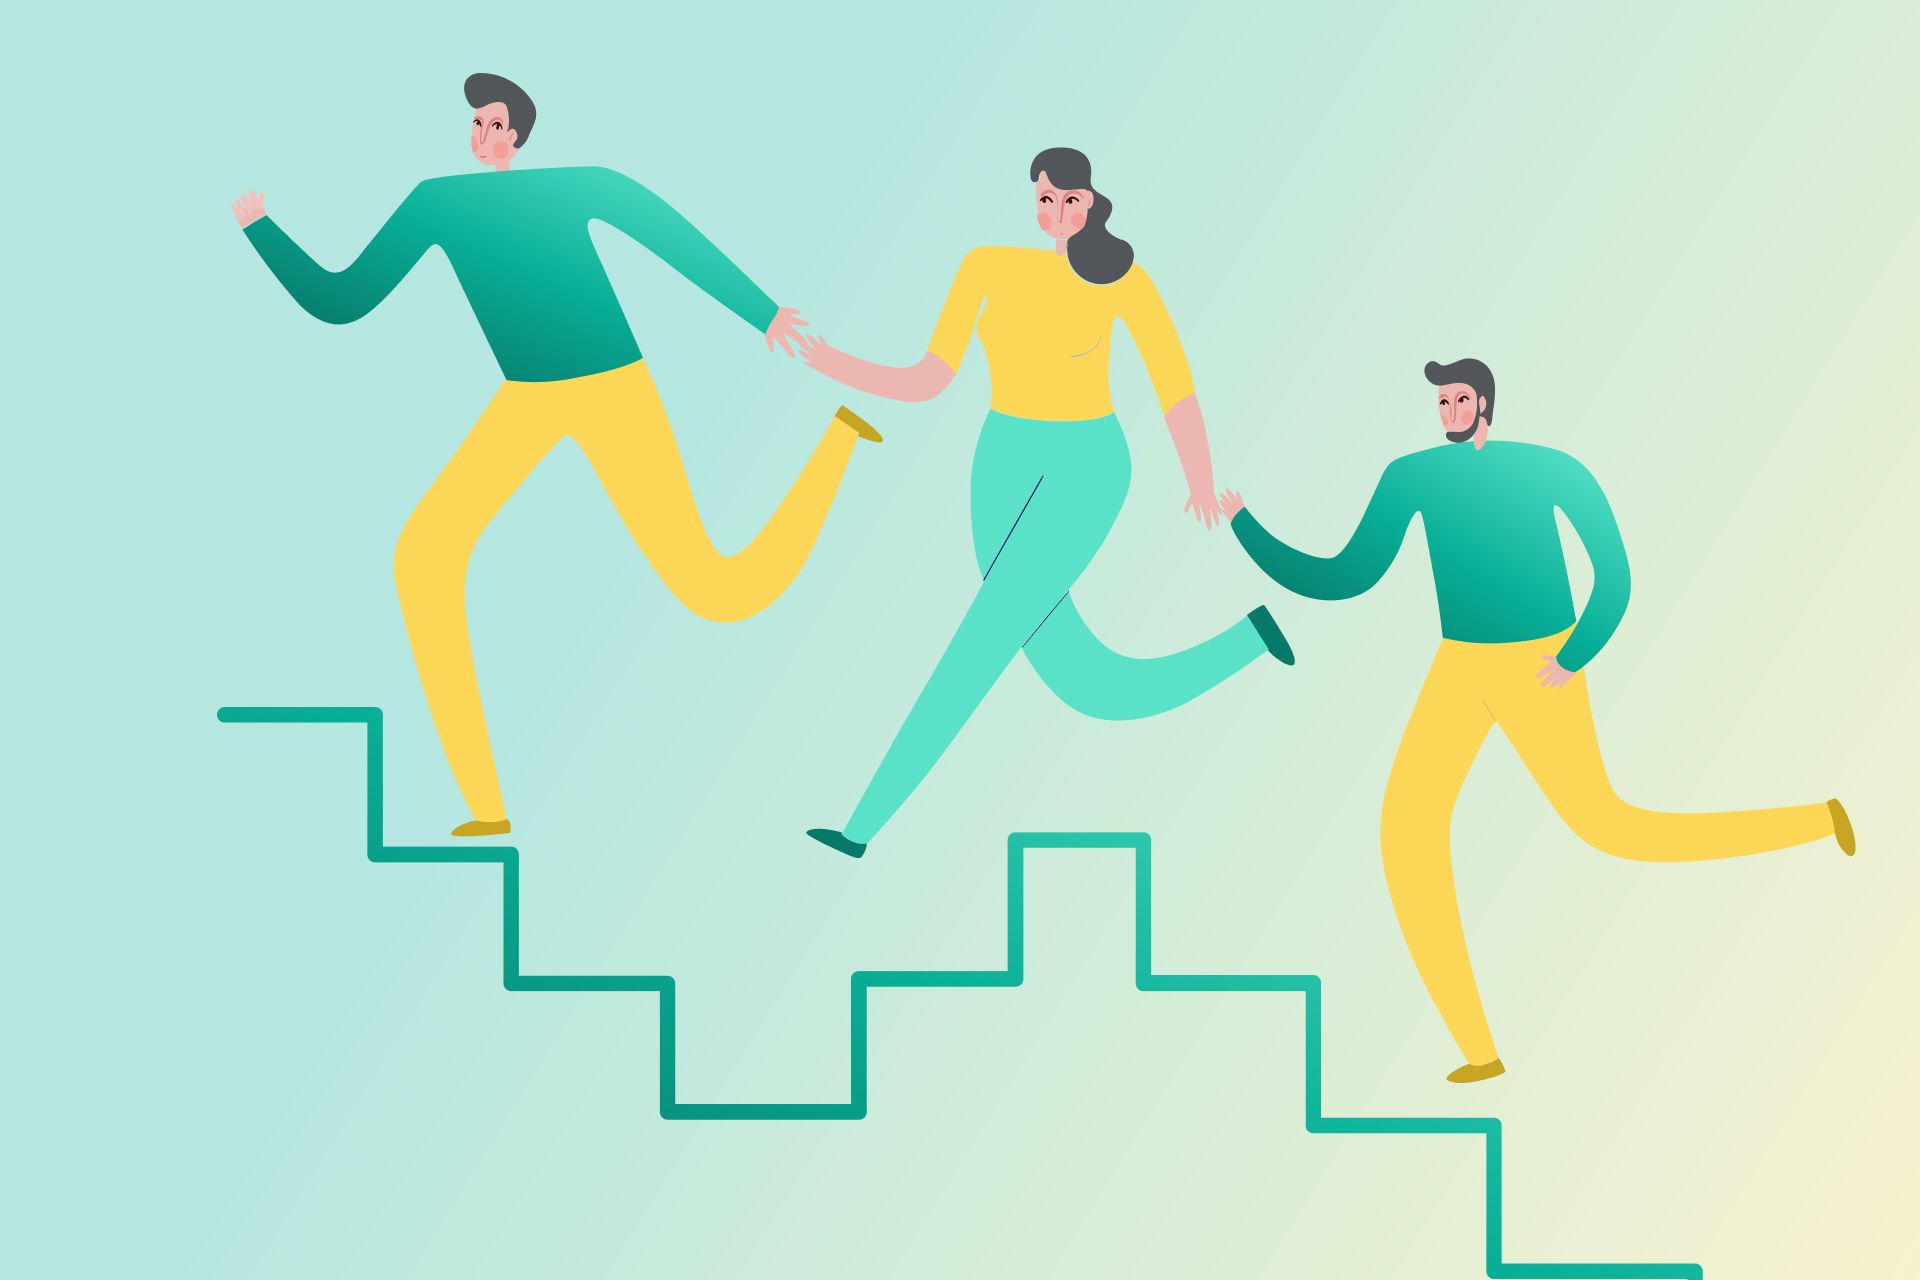 An infographic image of 3 people walking up a stairs holding hand in hand